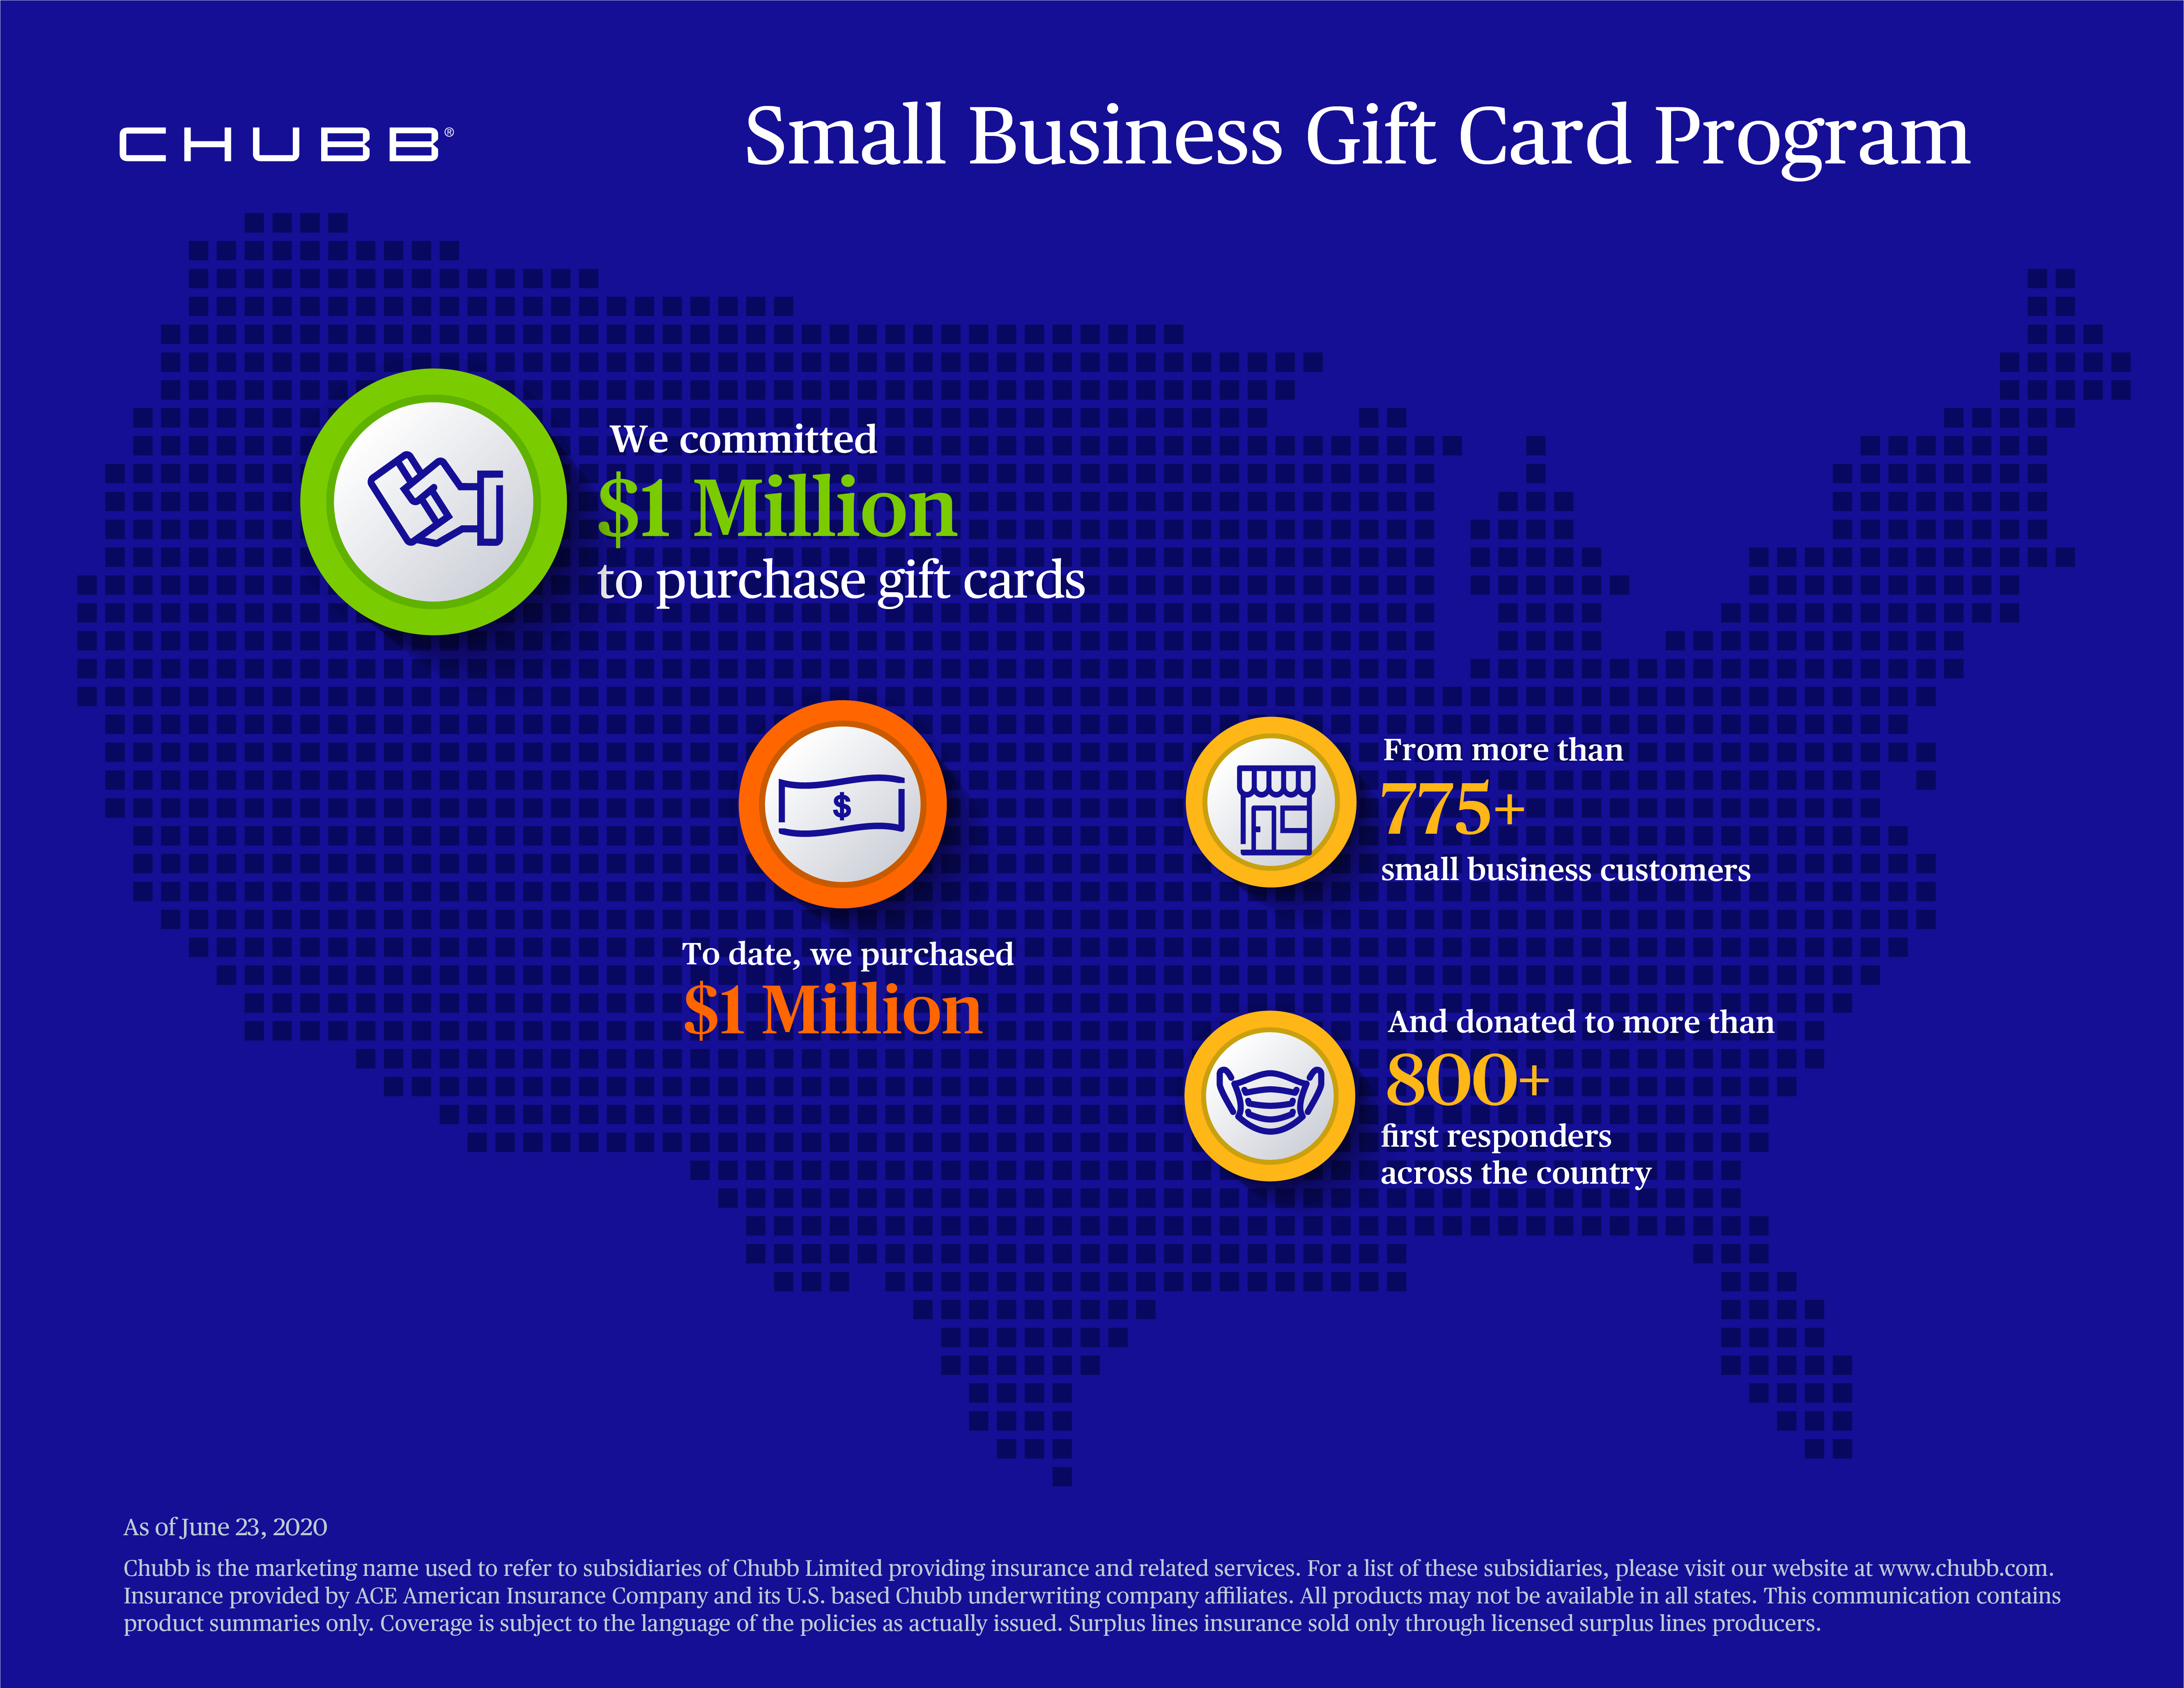 Infographic: We have committed $1 Million to purchase gift cards. To date, we purchased $900,000+ from more than 750+ small business customers, and donated to more than 300+ first responders across the country.